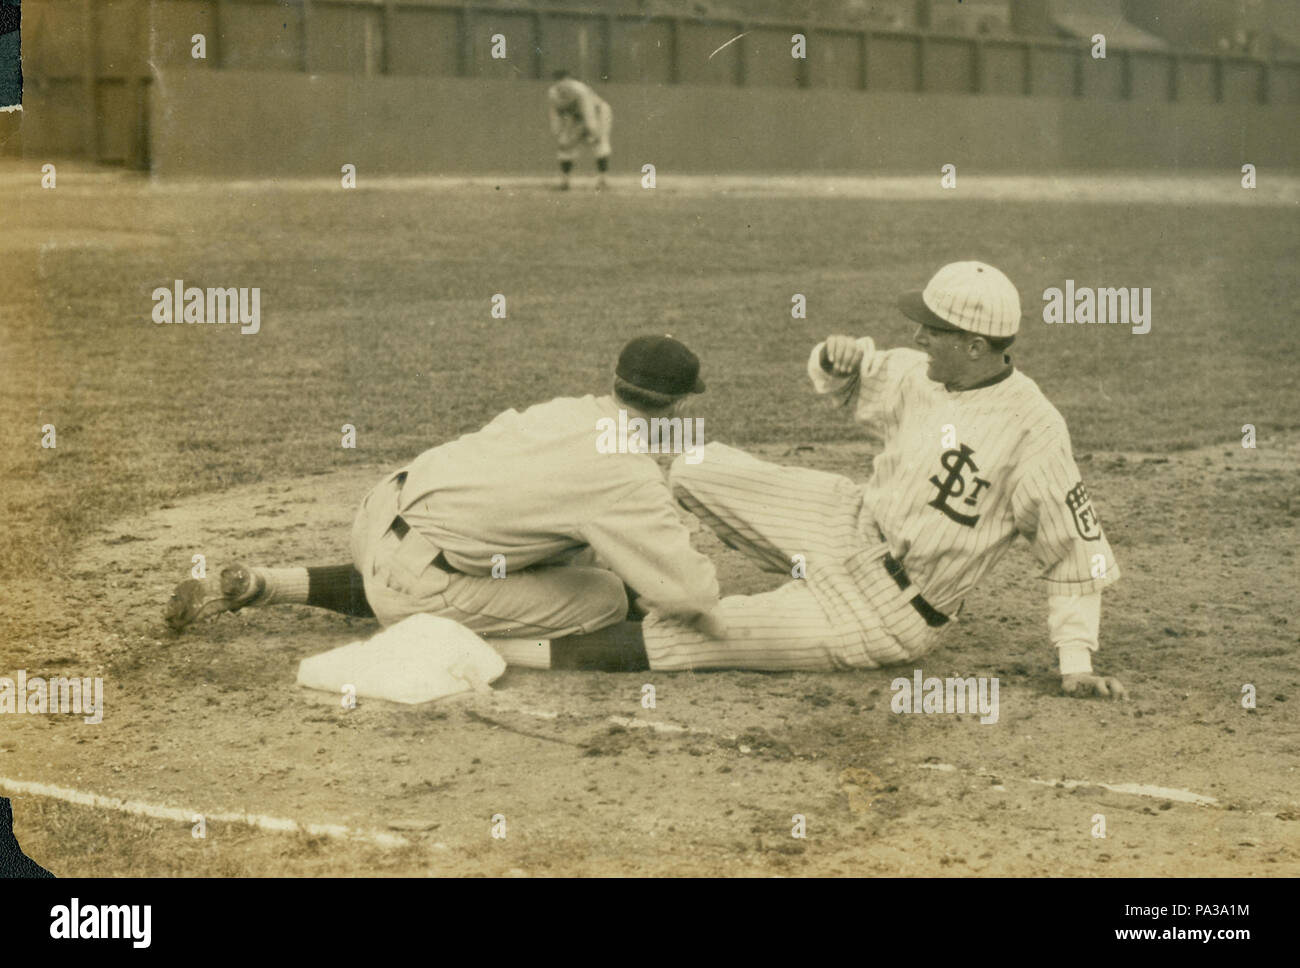 . English: A St. Louis Terriors player is sliding into third base with the third baseman there trying to tag him out. Can also see the center fielder. Title: A member of the St. Louis Terriers baseball team (Federal League) slides into third base during a game. between 1914 and 1915 84 A member of the St. Louis Terriers baseball team (Federal League) slides into third base during a game Stock Photo